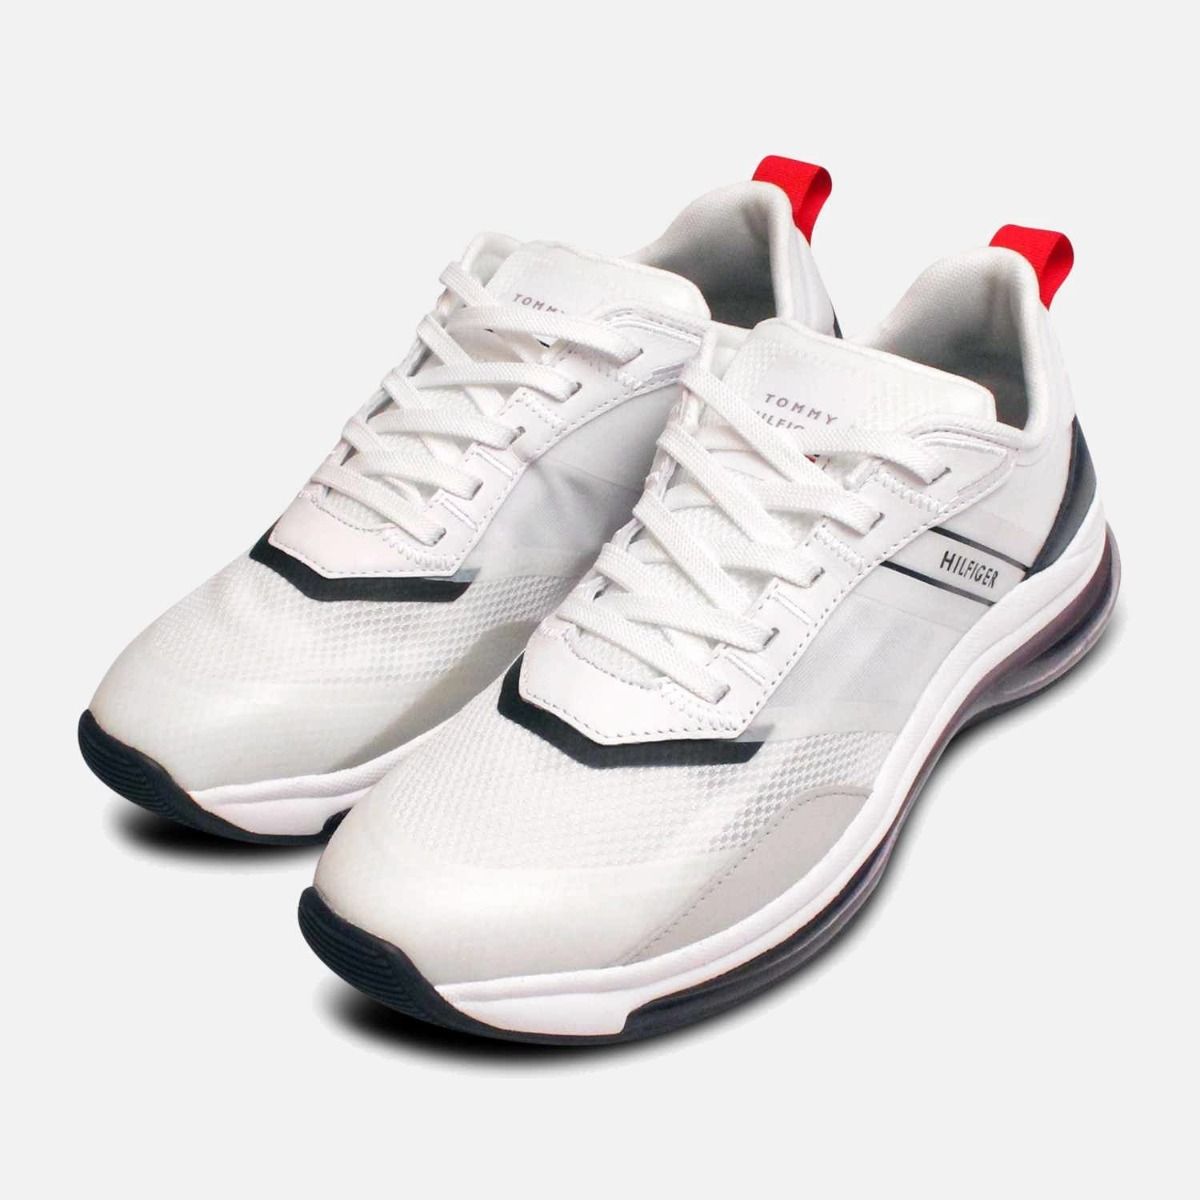 Tommy Hilfiger Air Sports Shoes in White